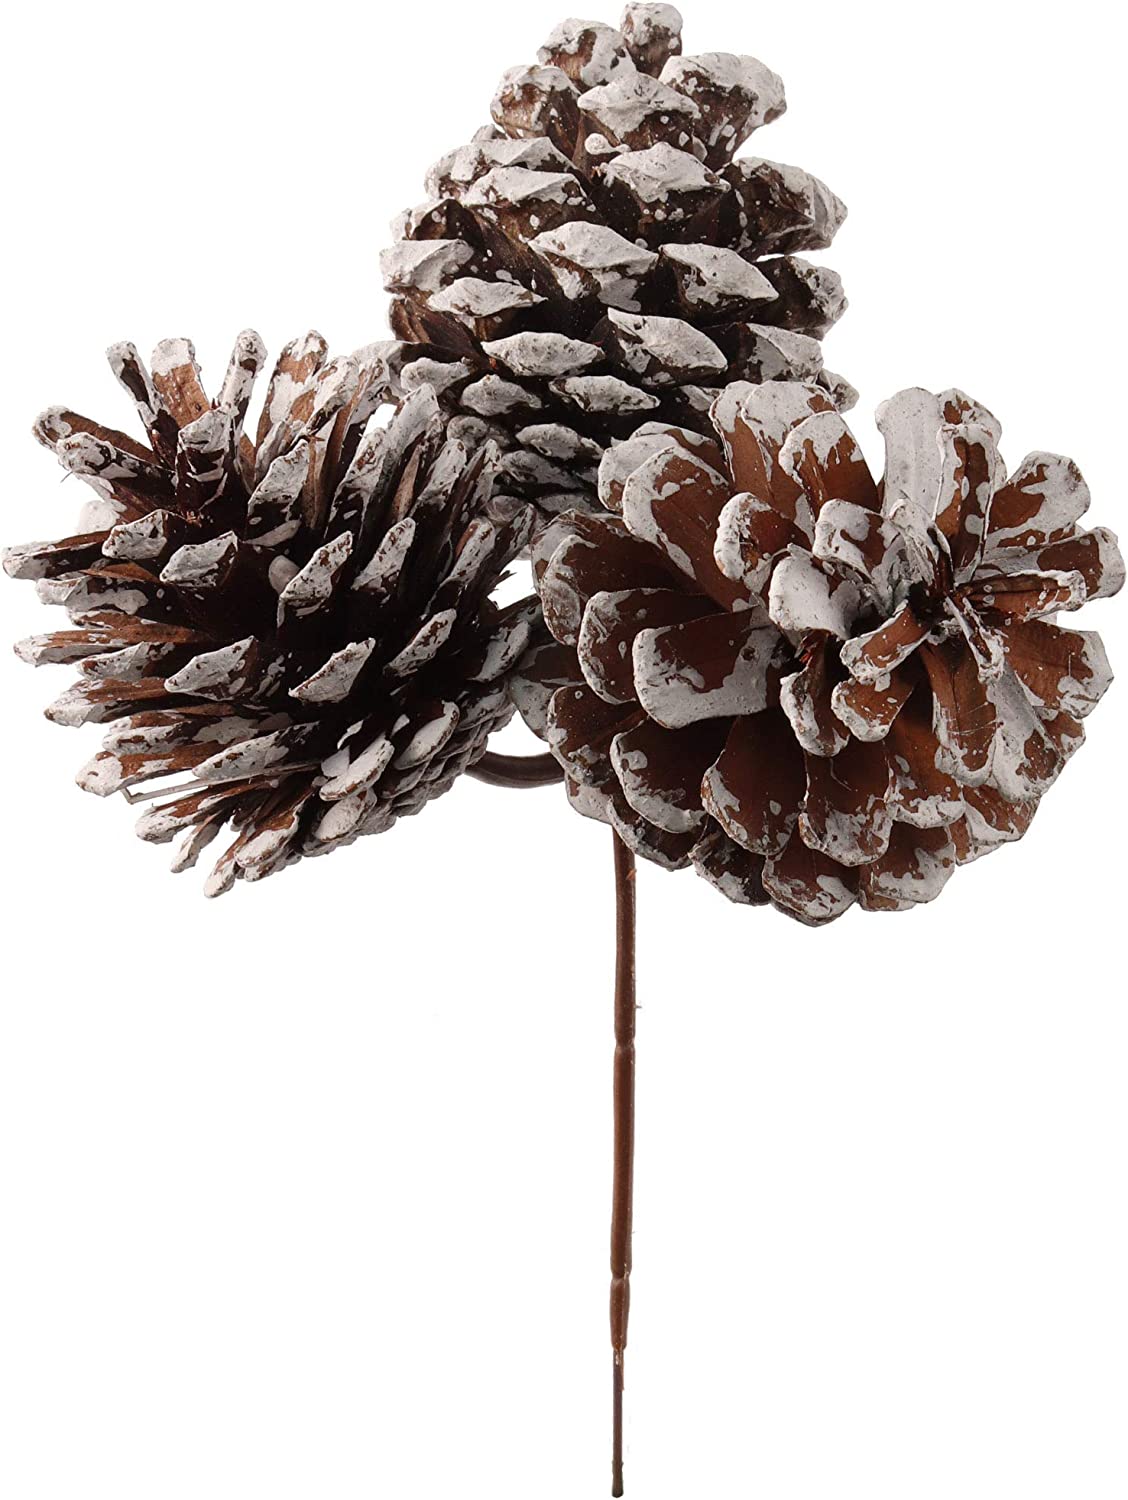 White Tipped Pine Cone Spray with 3 Perfect 2.5" Pine Cones on Bendable Pine Cone Spray ArtificialFlowers   